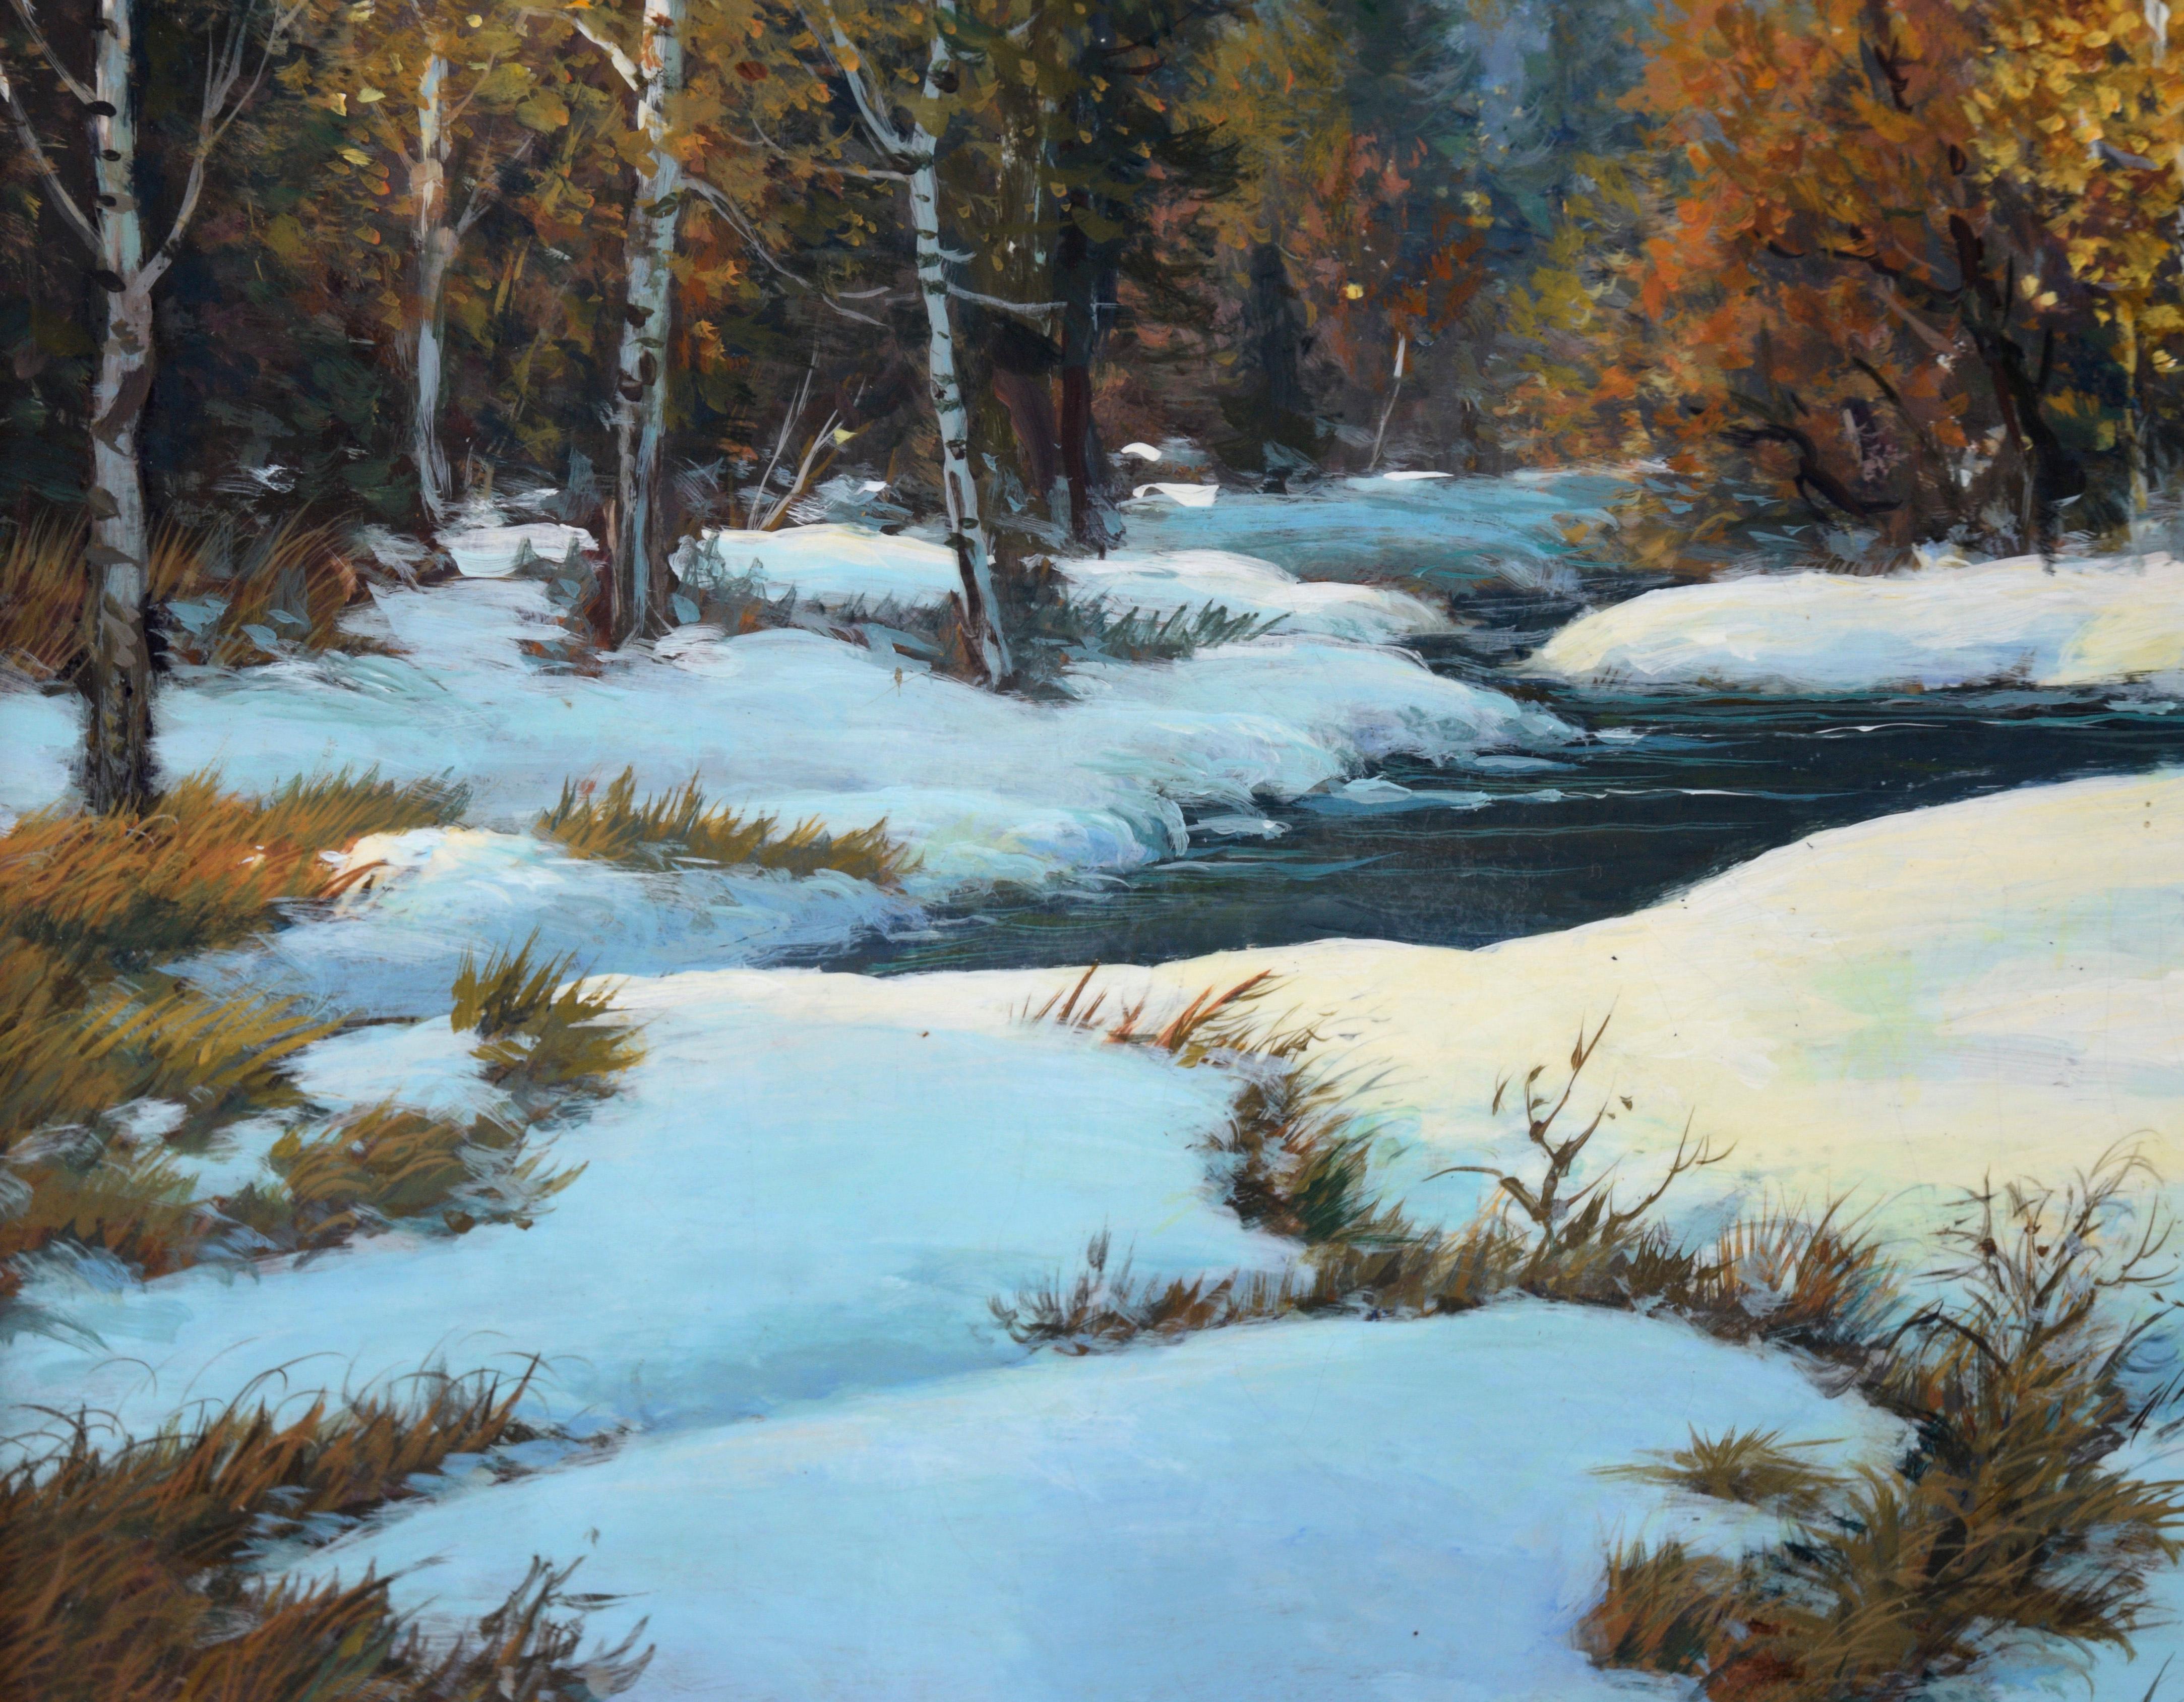 Snowy Creek in Hope Valley - Landscape in Oil on Masonite - American Impressionist Painting by Dean Packer